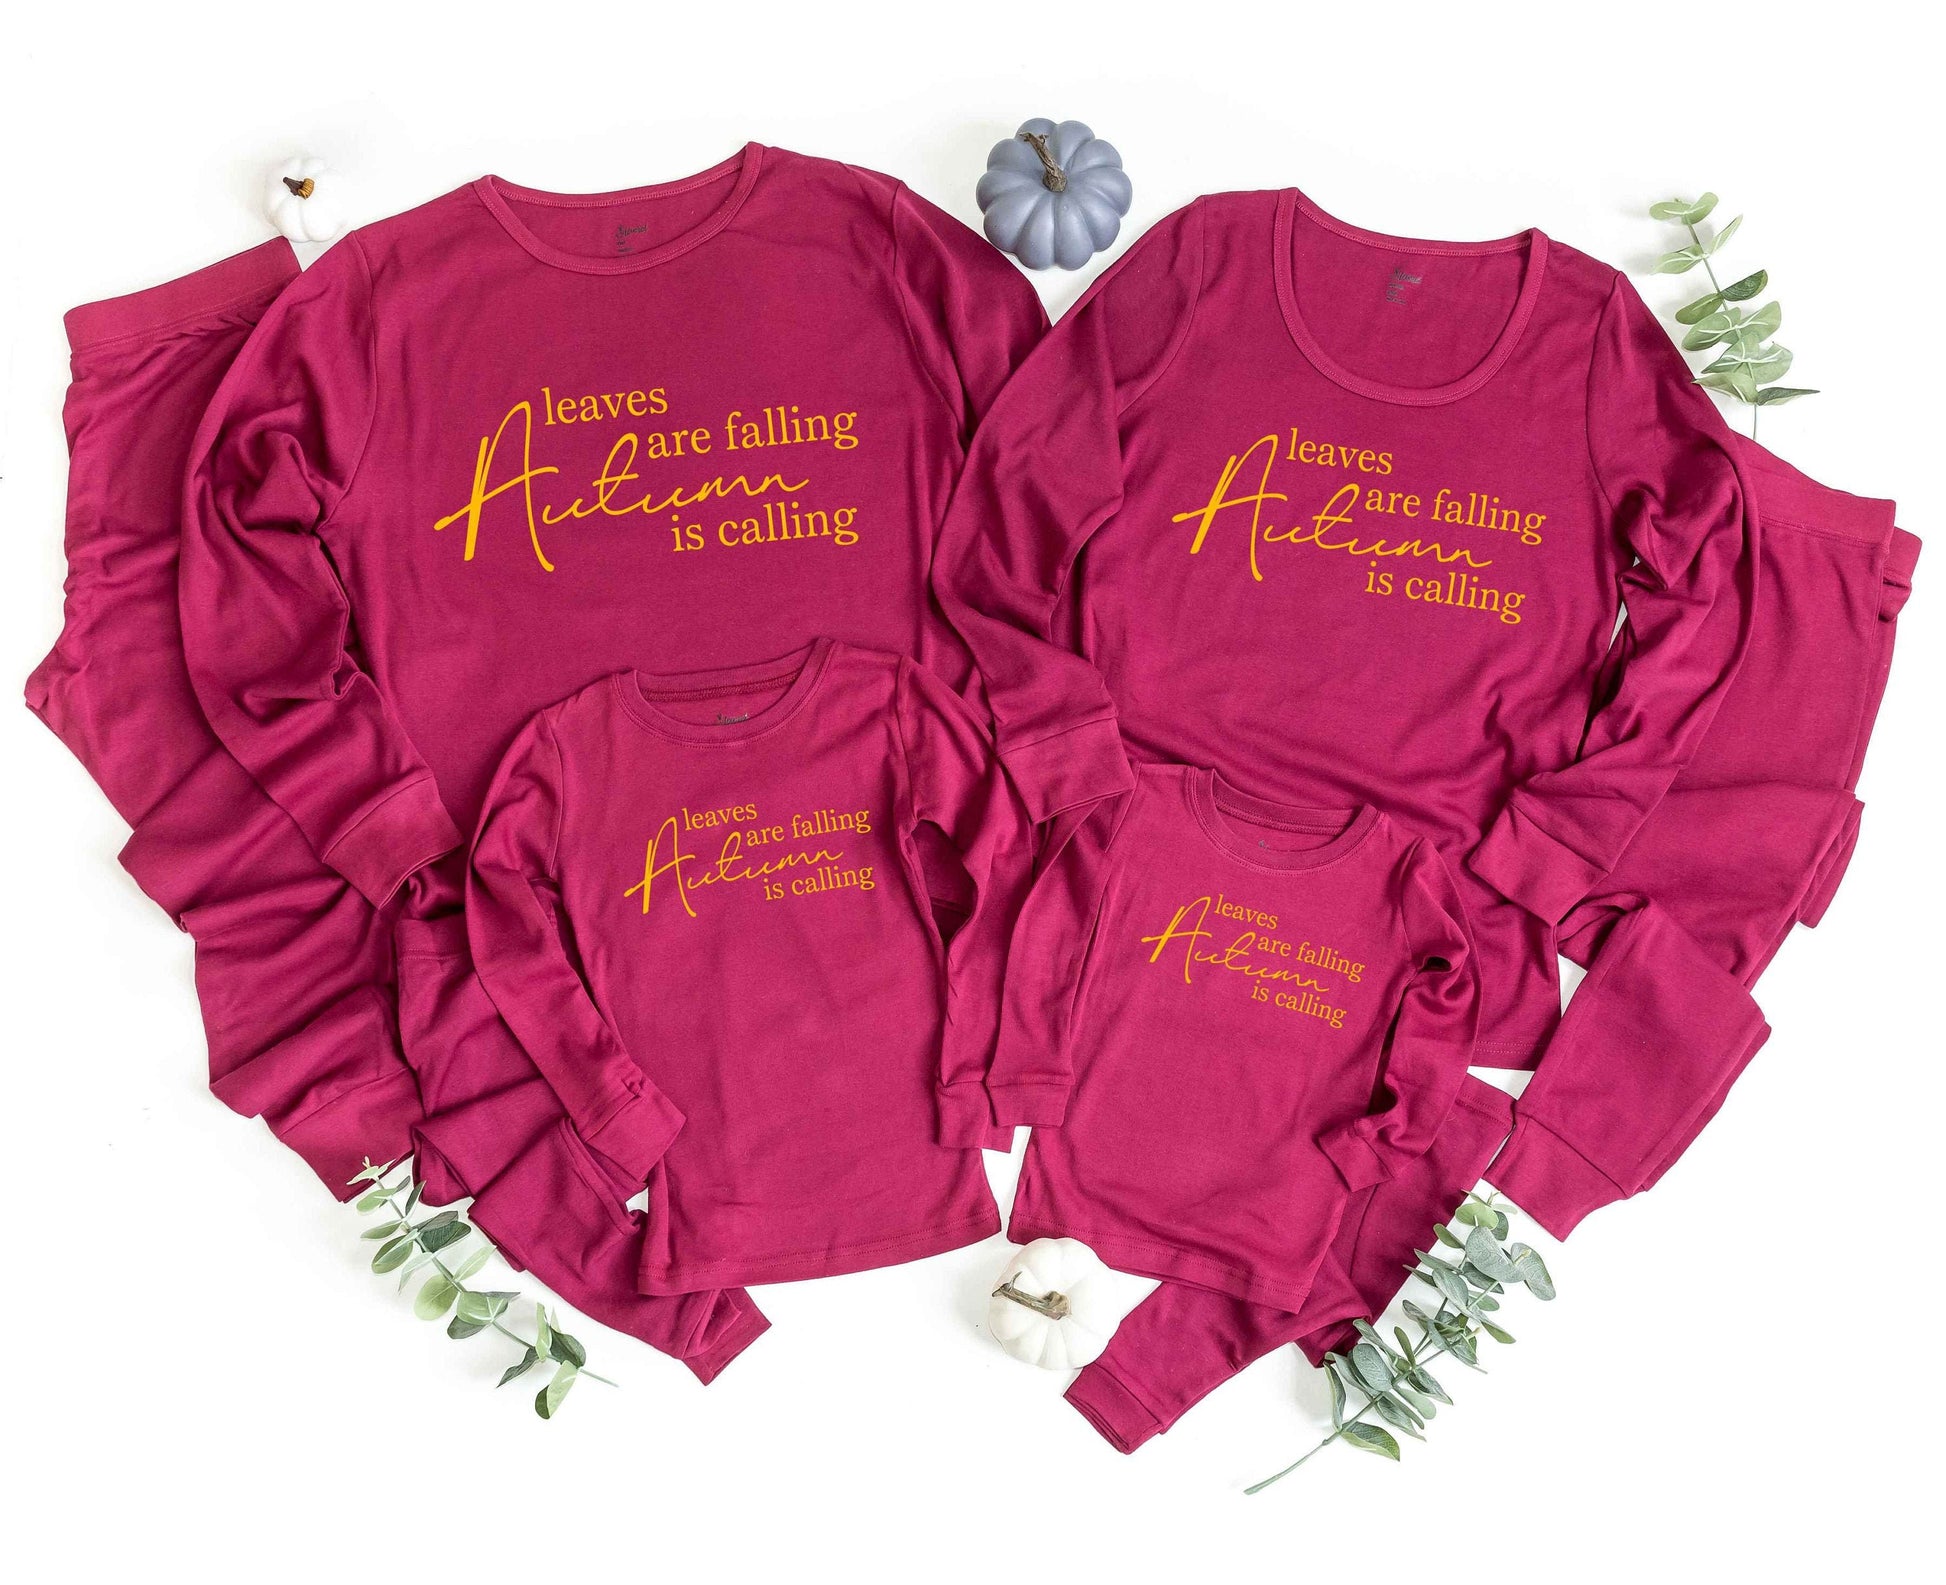 Leaves are Falling Autumn is Calling Maroon Pajama Set - adult and kids sizes - fall jammies - Thanksgiving Pajamas for the family